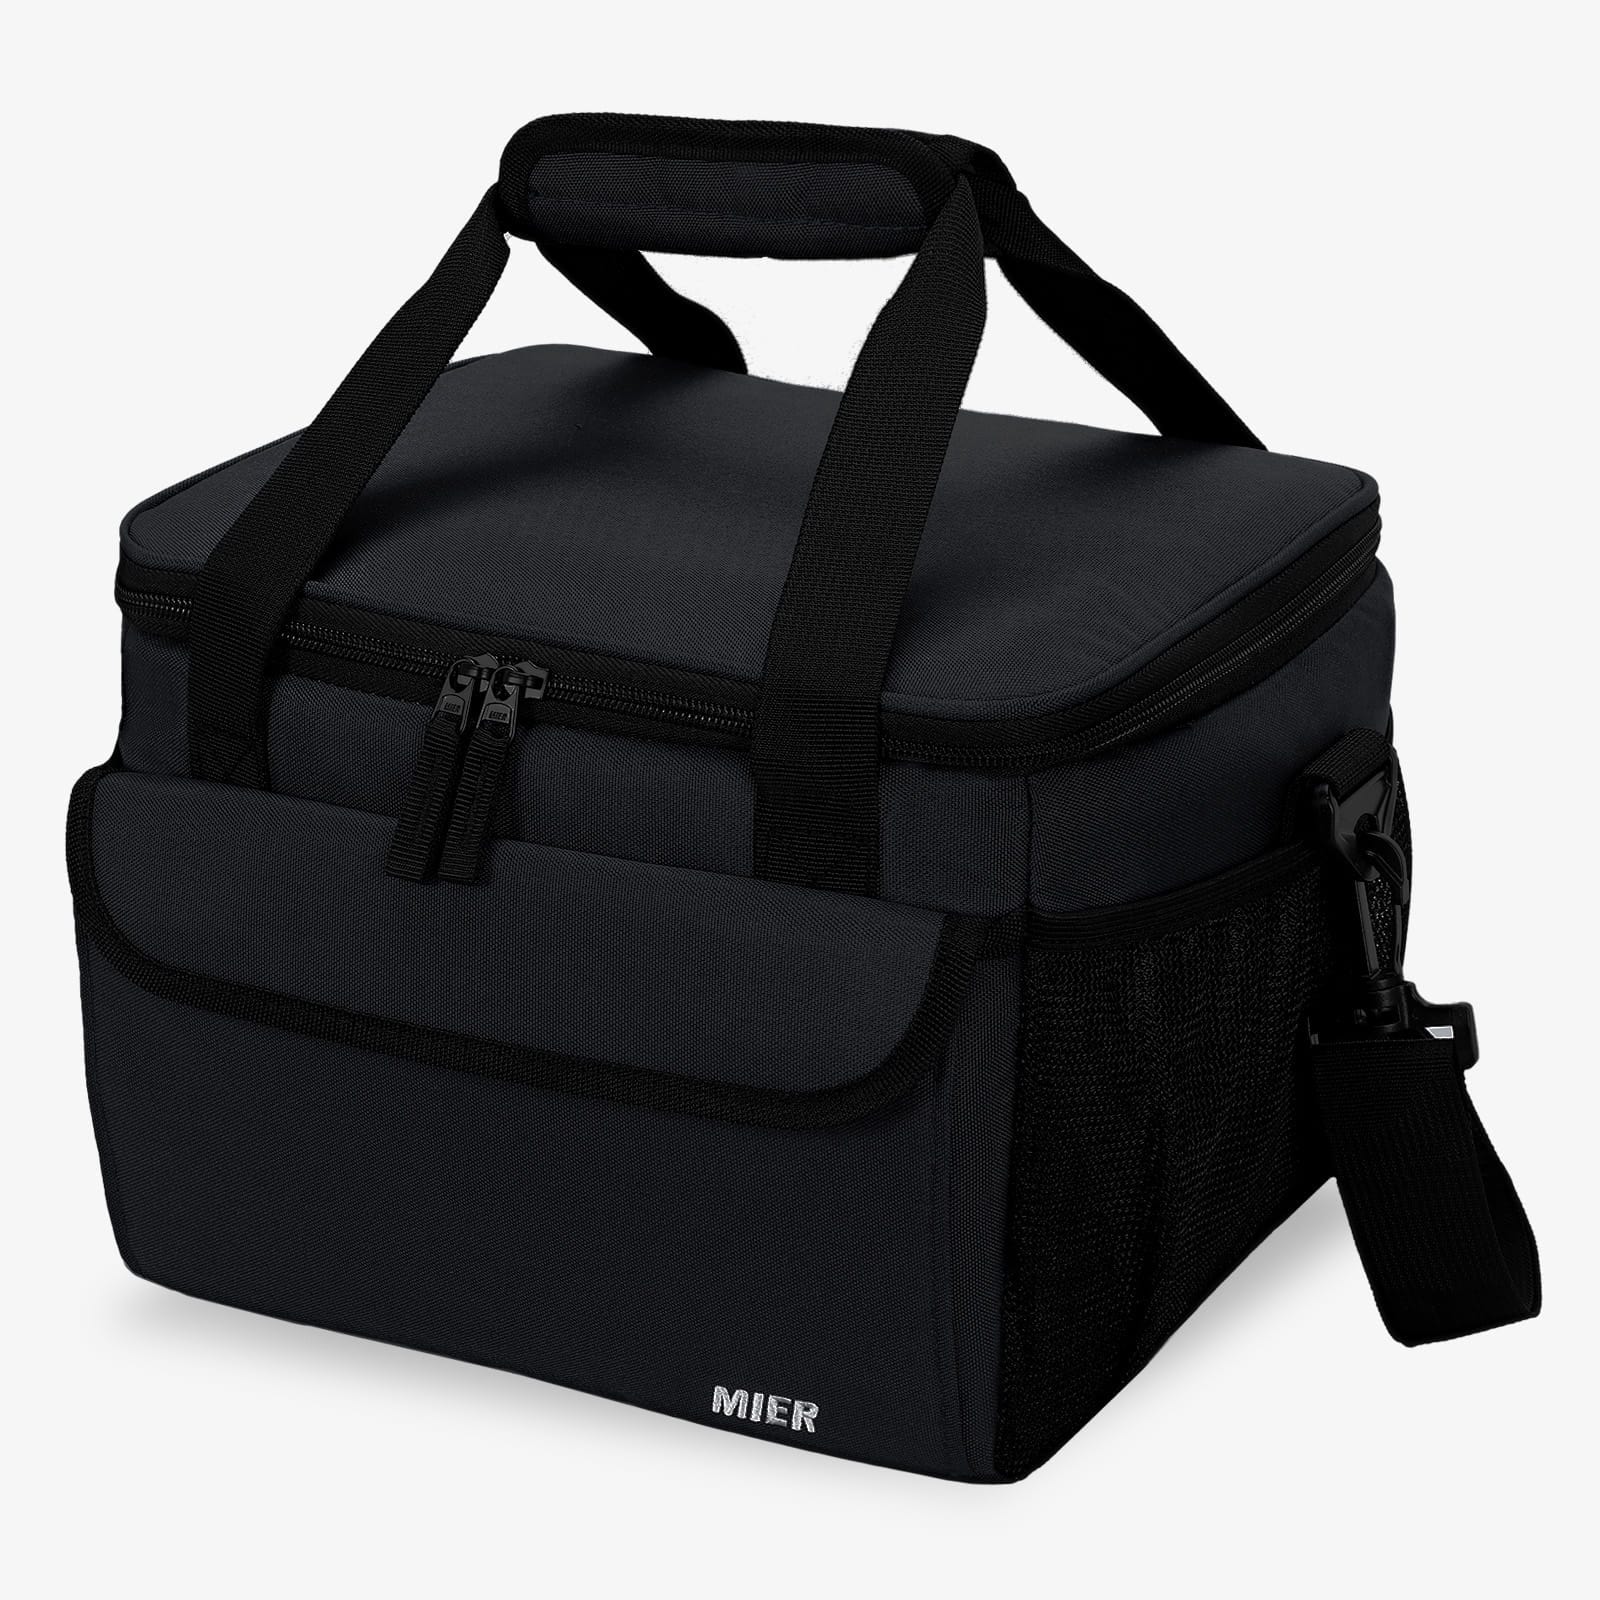 Large Lunch Box for Men Insulated Lunch Bags Adult Lunch Bag Black MIER